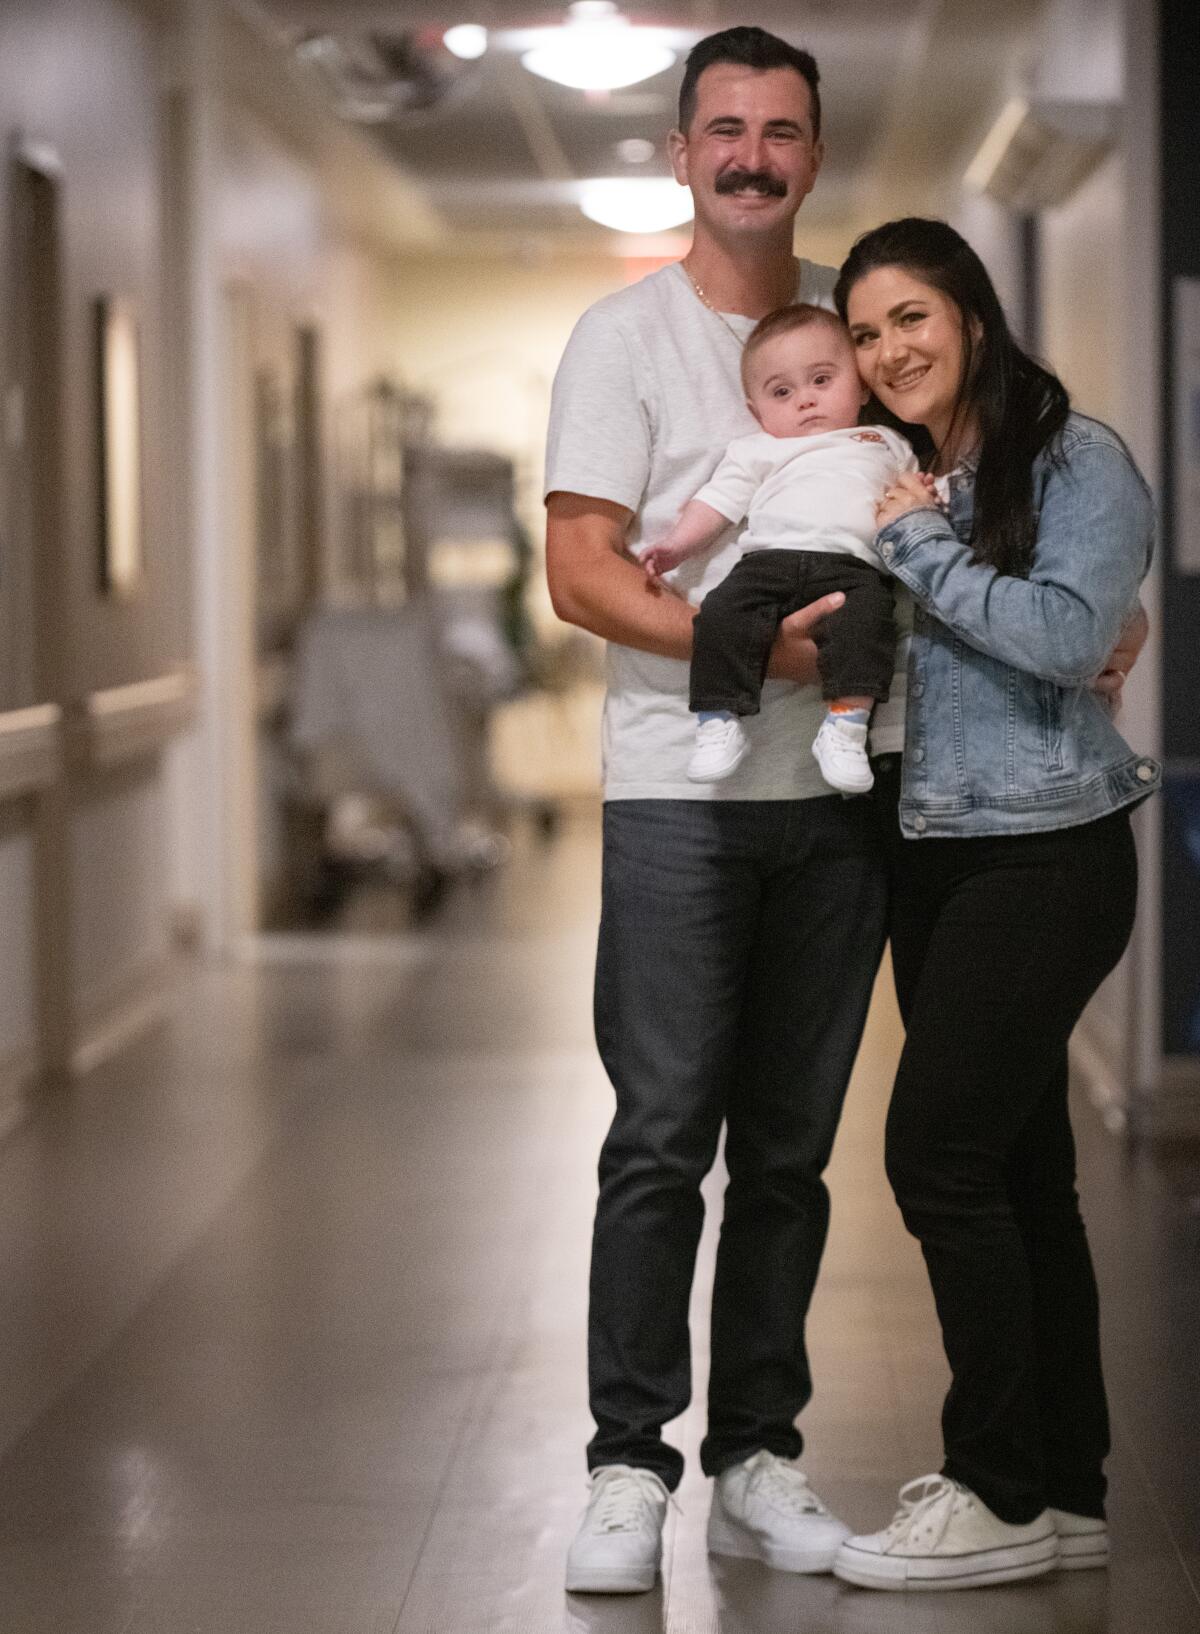 Mikey, Jay Nova and Megan Sanchez pose Wednesday in the Hoag NICU facility.